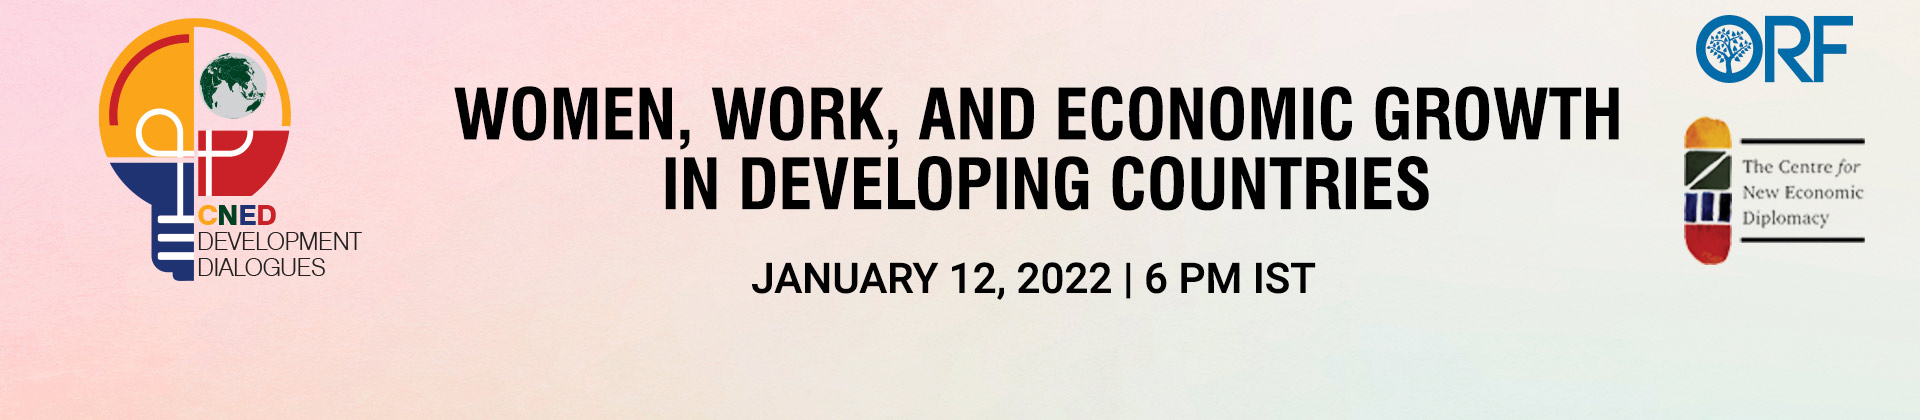 Women, Work, and Economic Growth in Developing Countries | CNED Development Dialogues